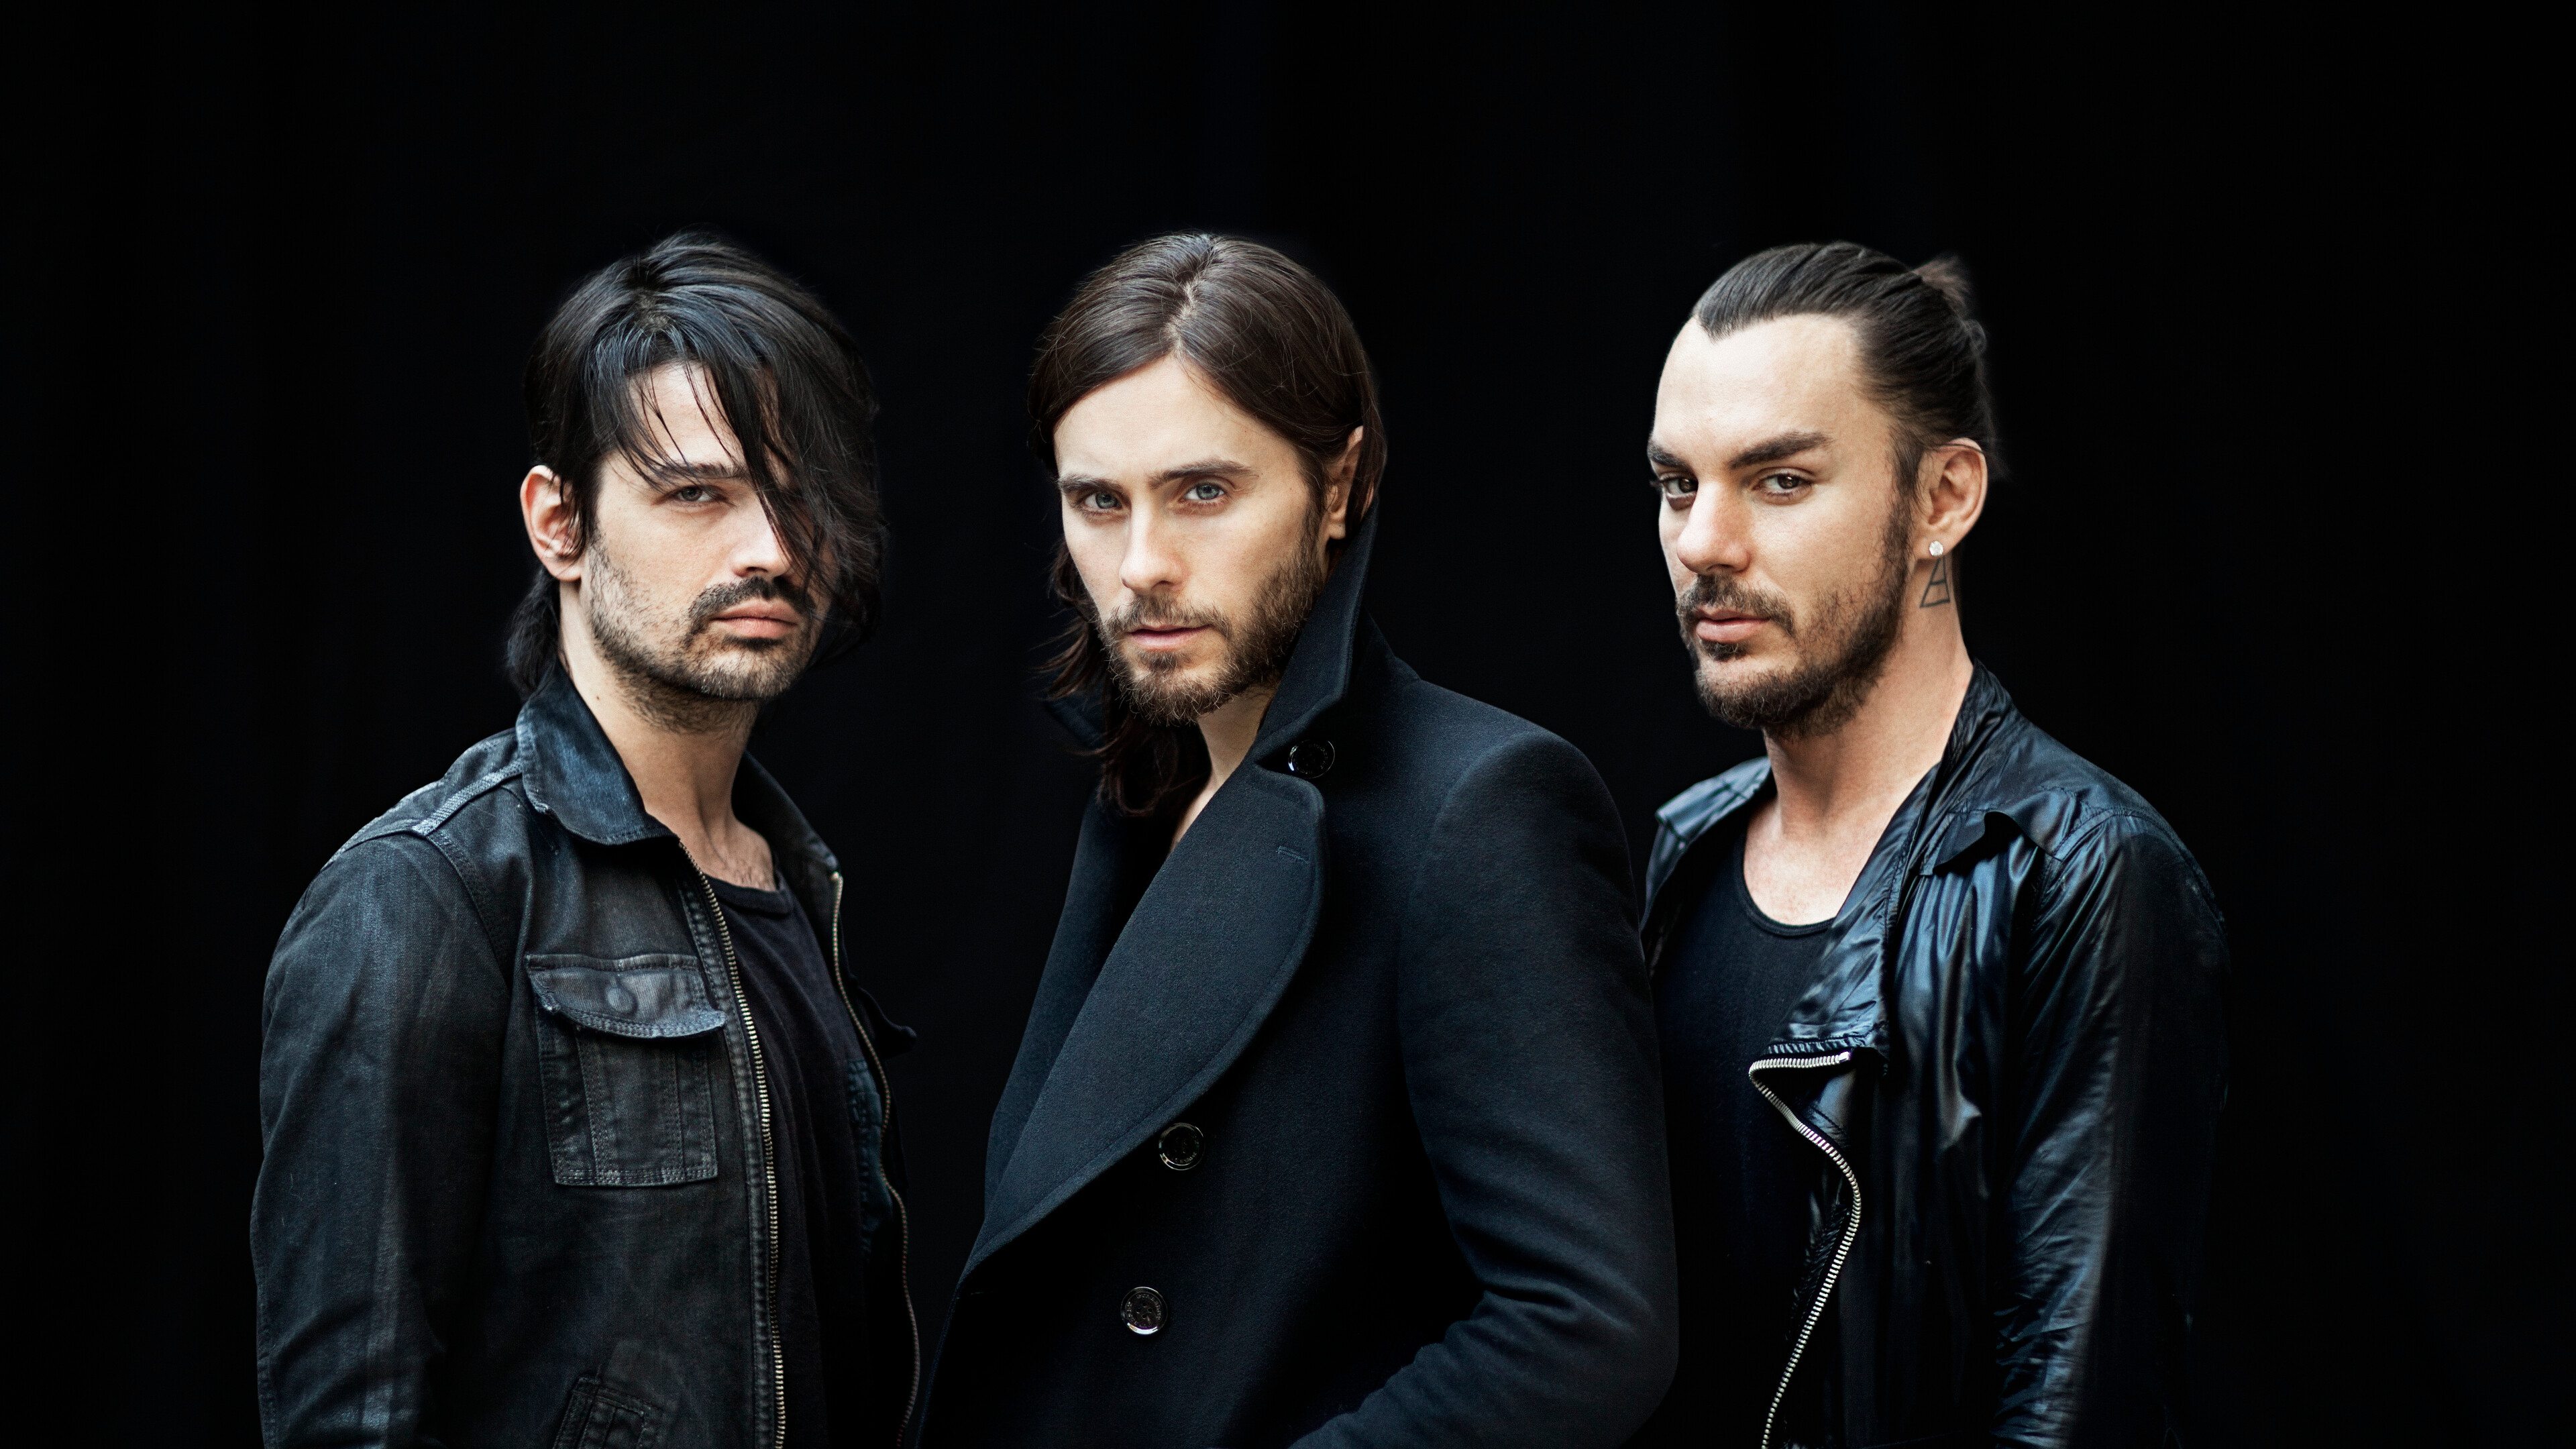 Thirty Seconds to Mars: "Attack" was released by Immortal and Virgin on May 3, 2005. 3840x2160 4K Wallpaper.